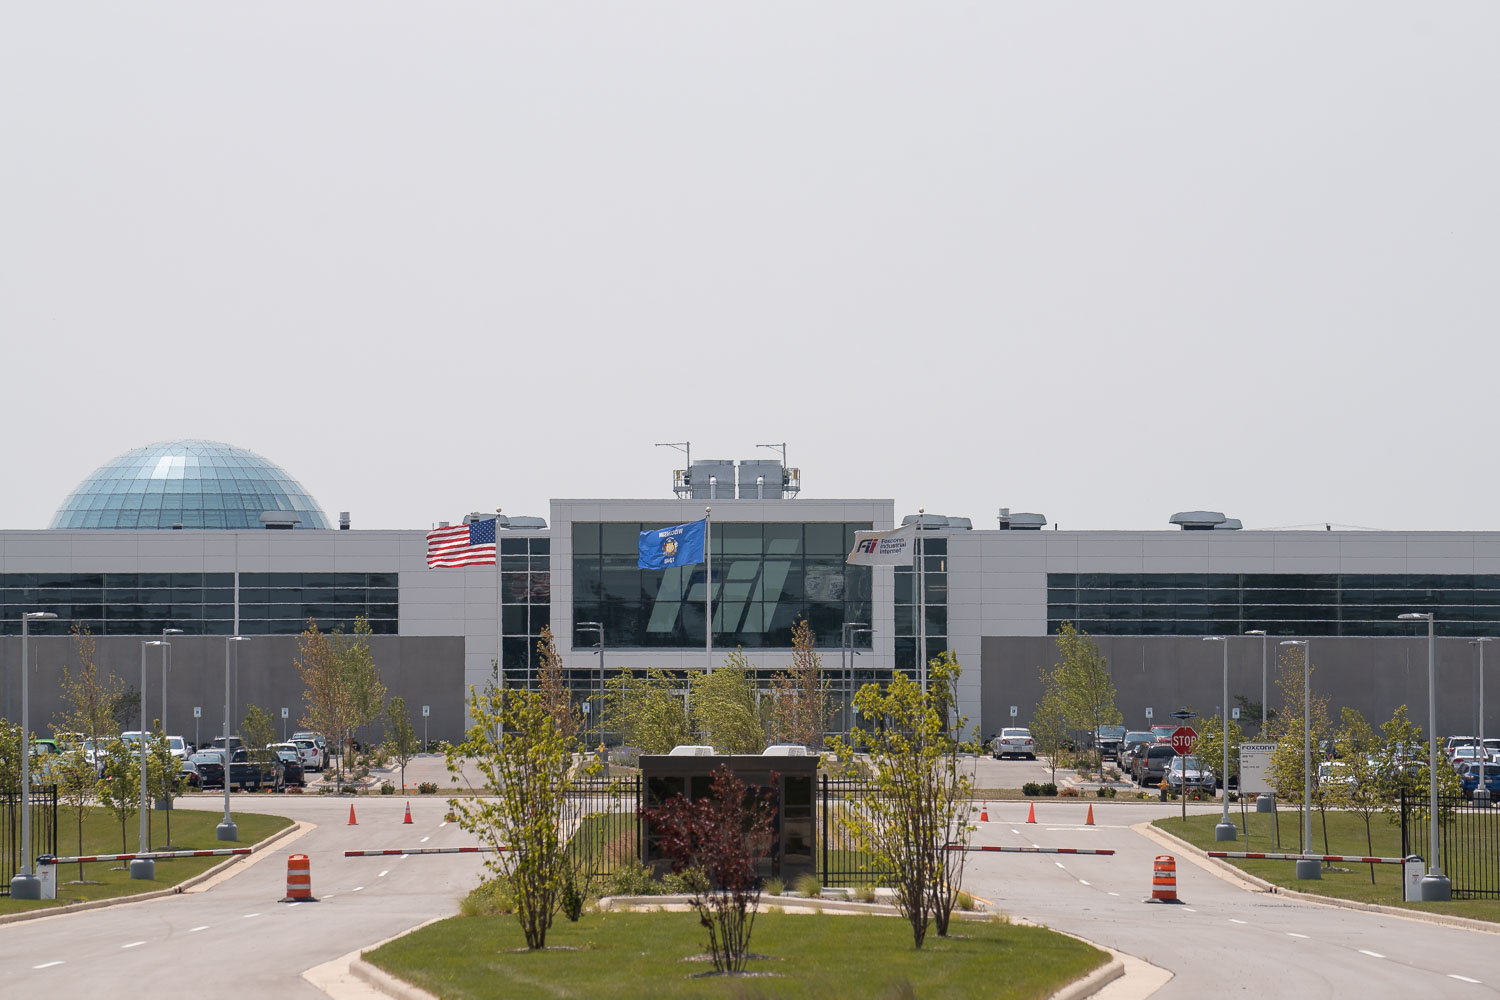 Foxconn Fii building in Mount Pleasant, Wisconsin. The facility is said to produce server and networking parts.